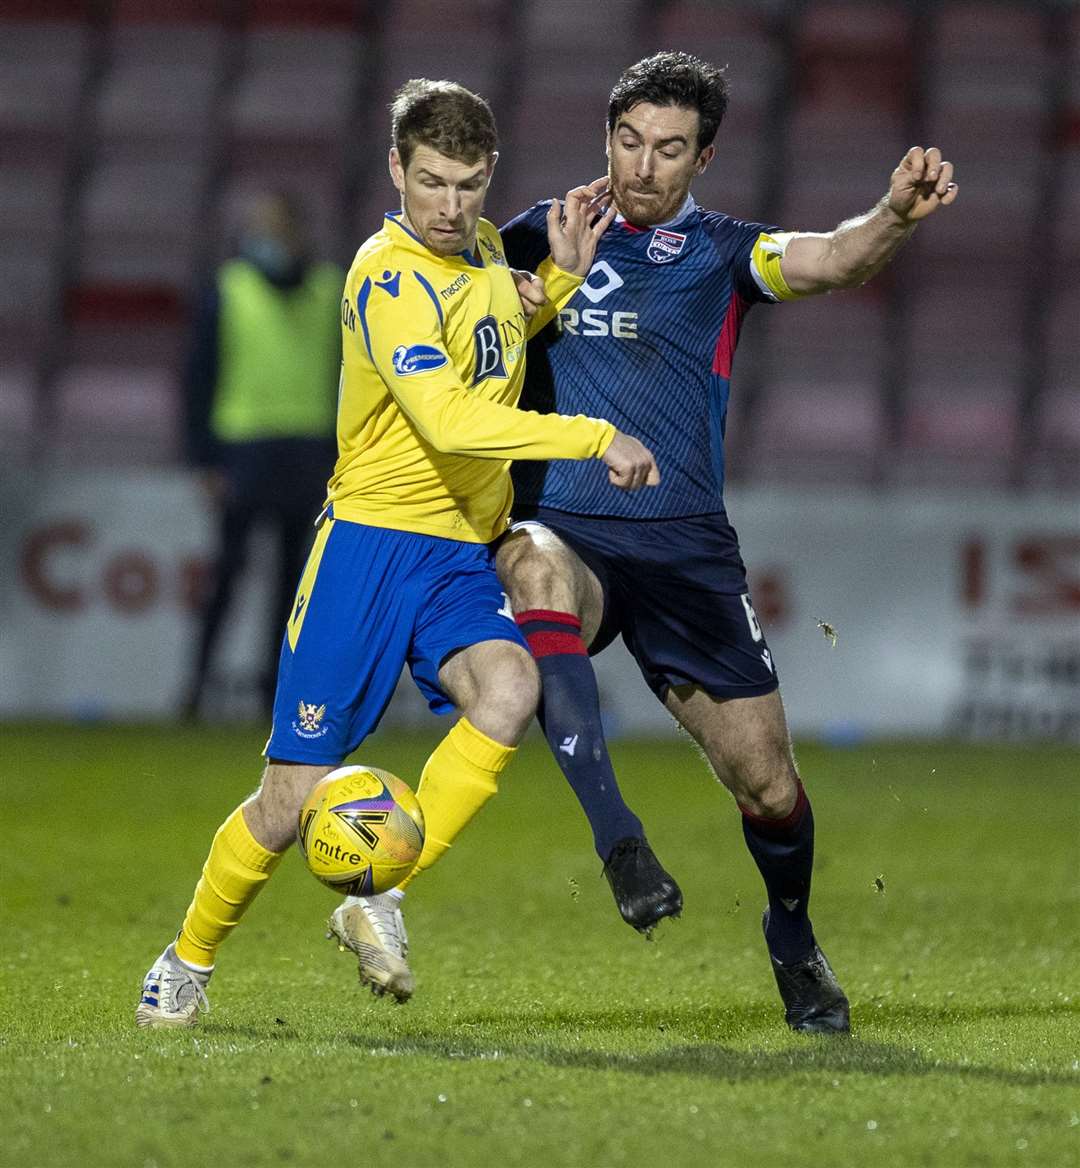 Ross County's Ross Draper clears from St.Johnstone's David Wotherspoon in 2021